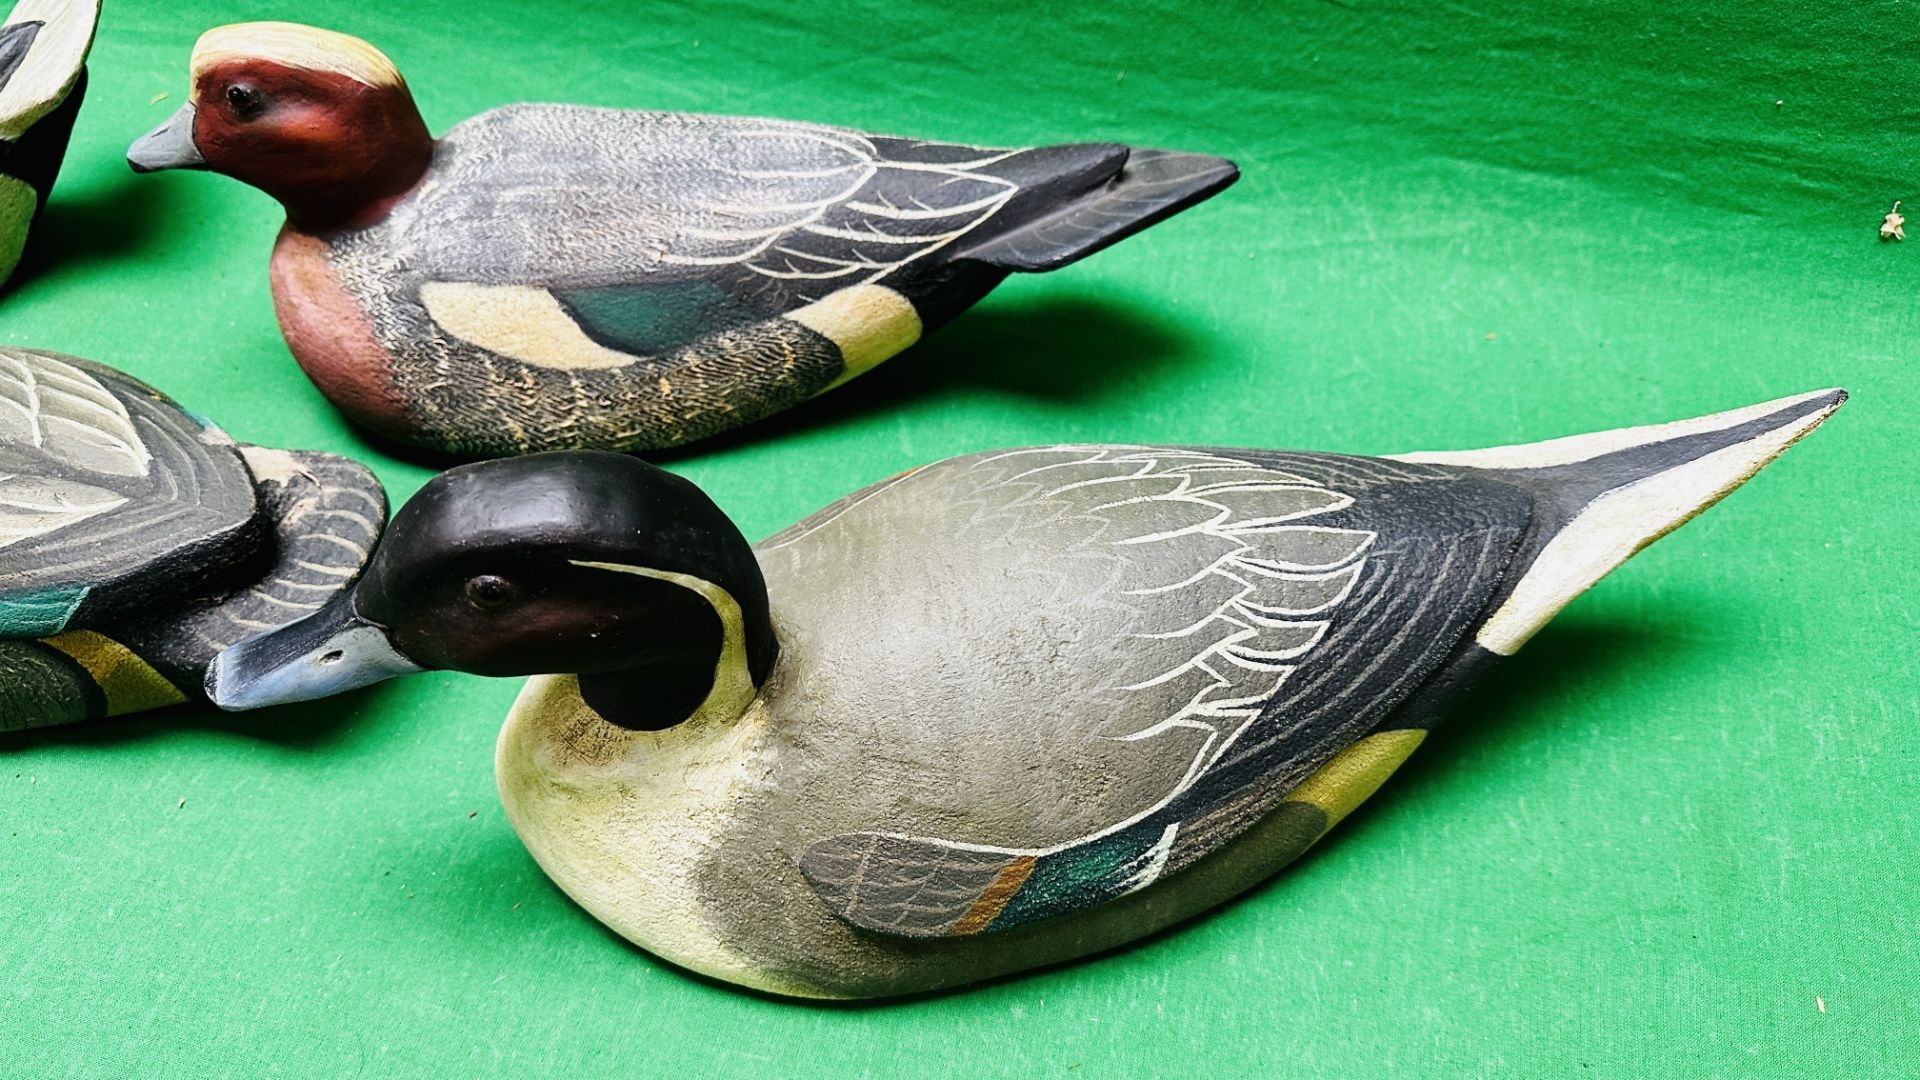 A HANDCRAFTED SET OF 4 DUCK DECOYS HAVING HANDPAINTED DETAIL AND GLASS EYES. - Image 8 of 13